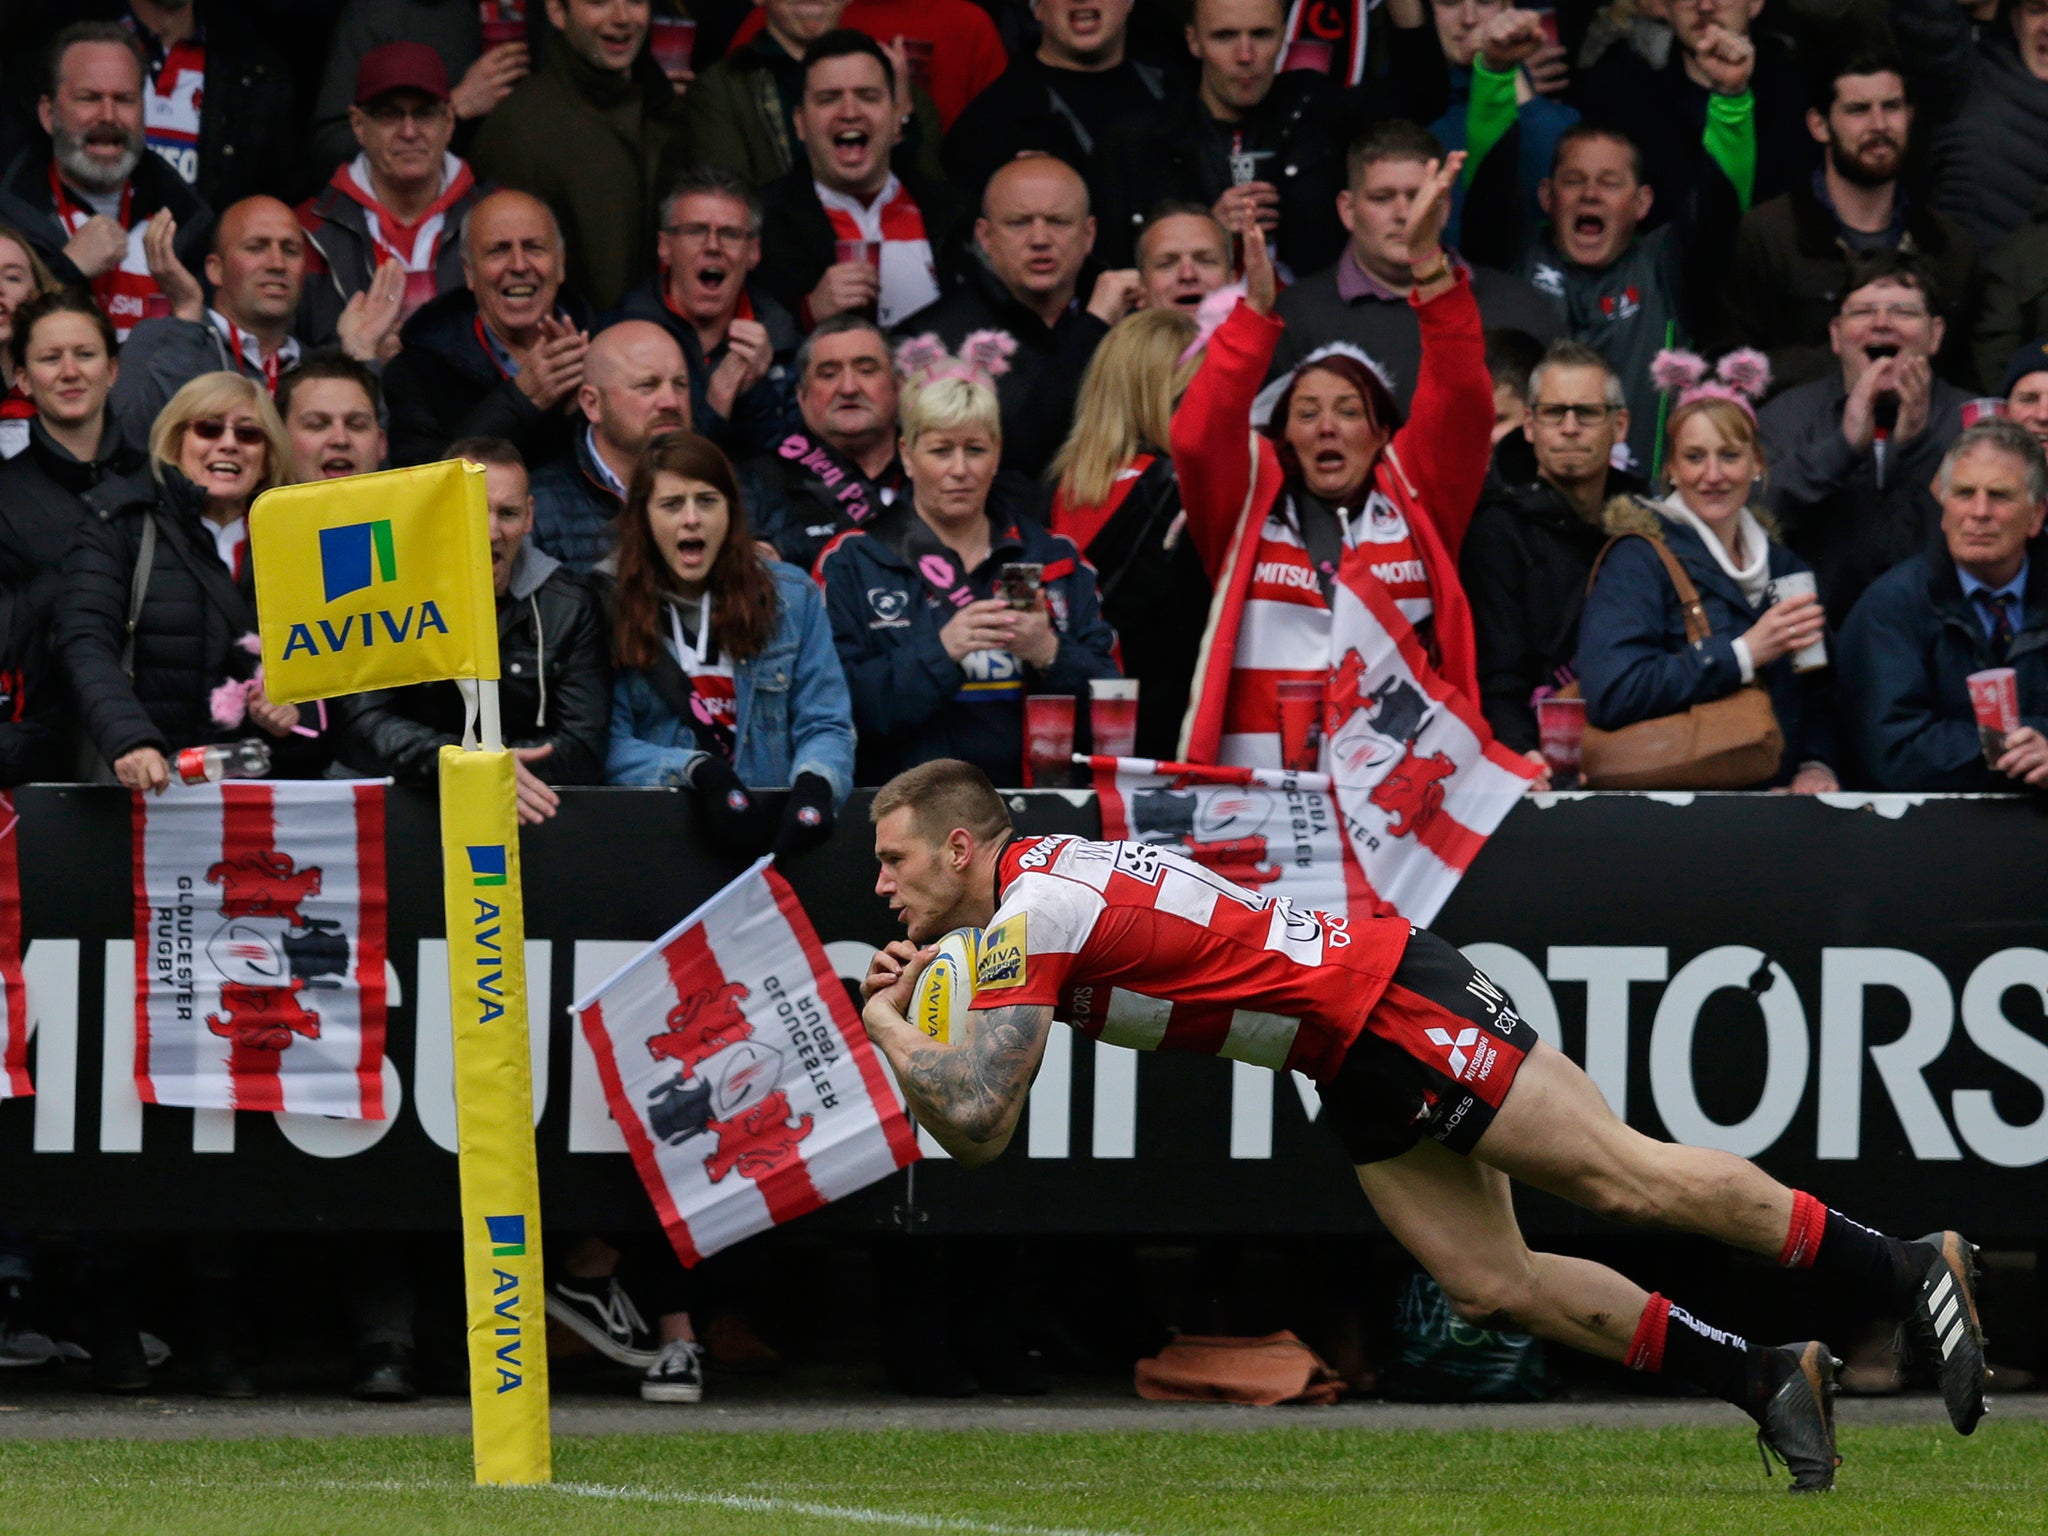 Jason Woodward dives over for one of Gloucester's three tries